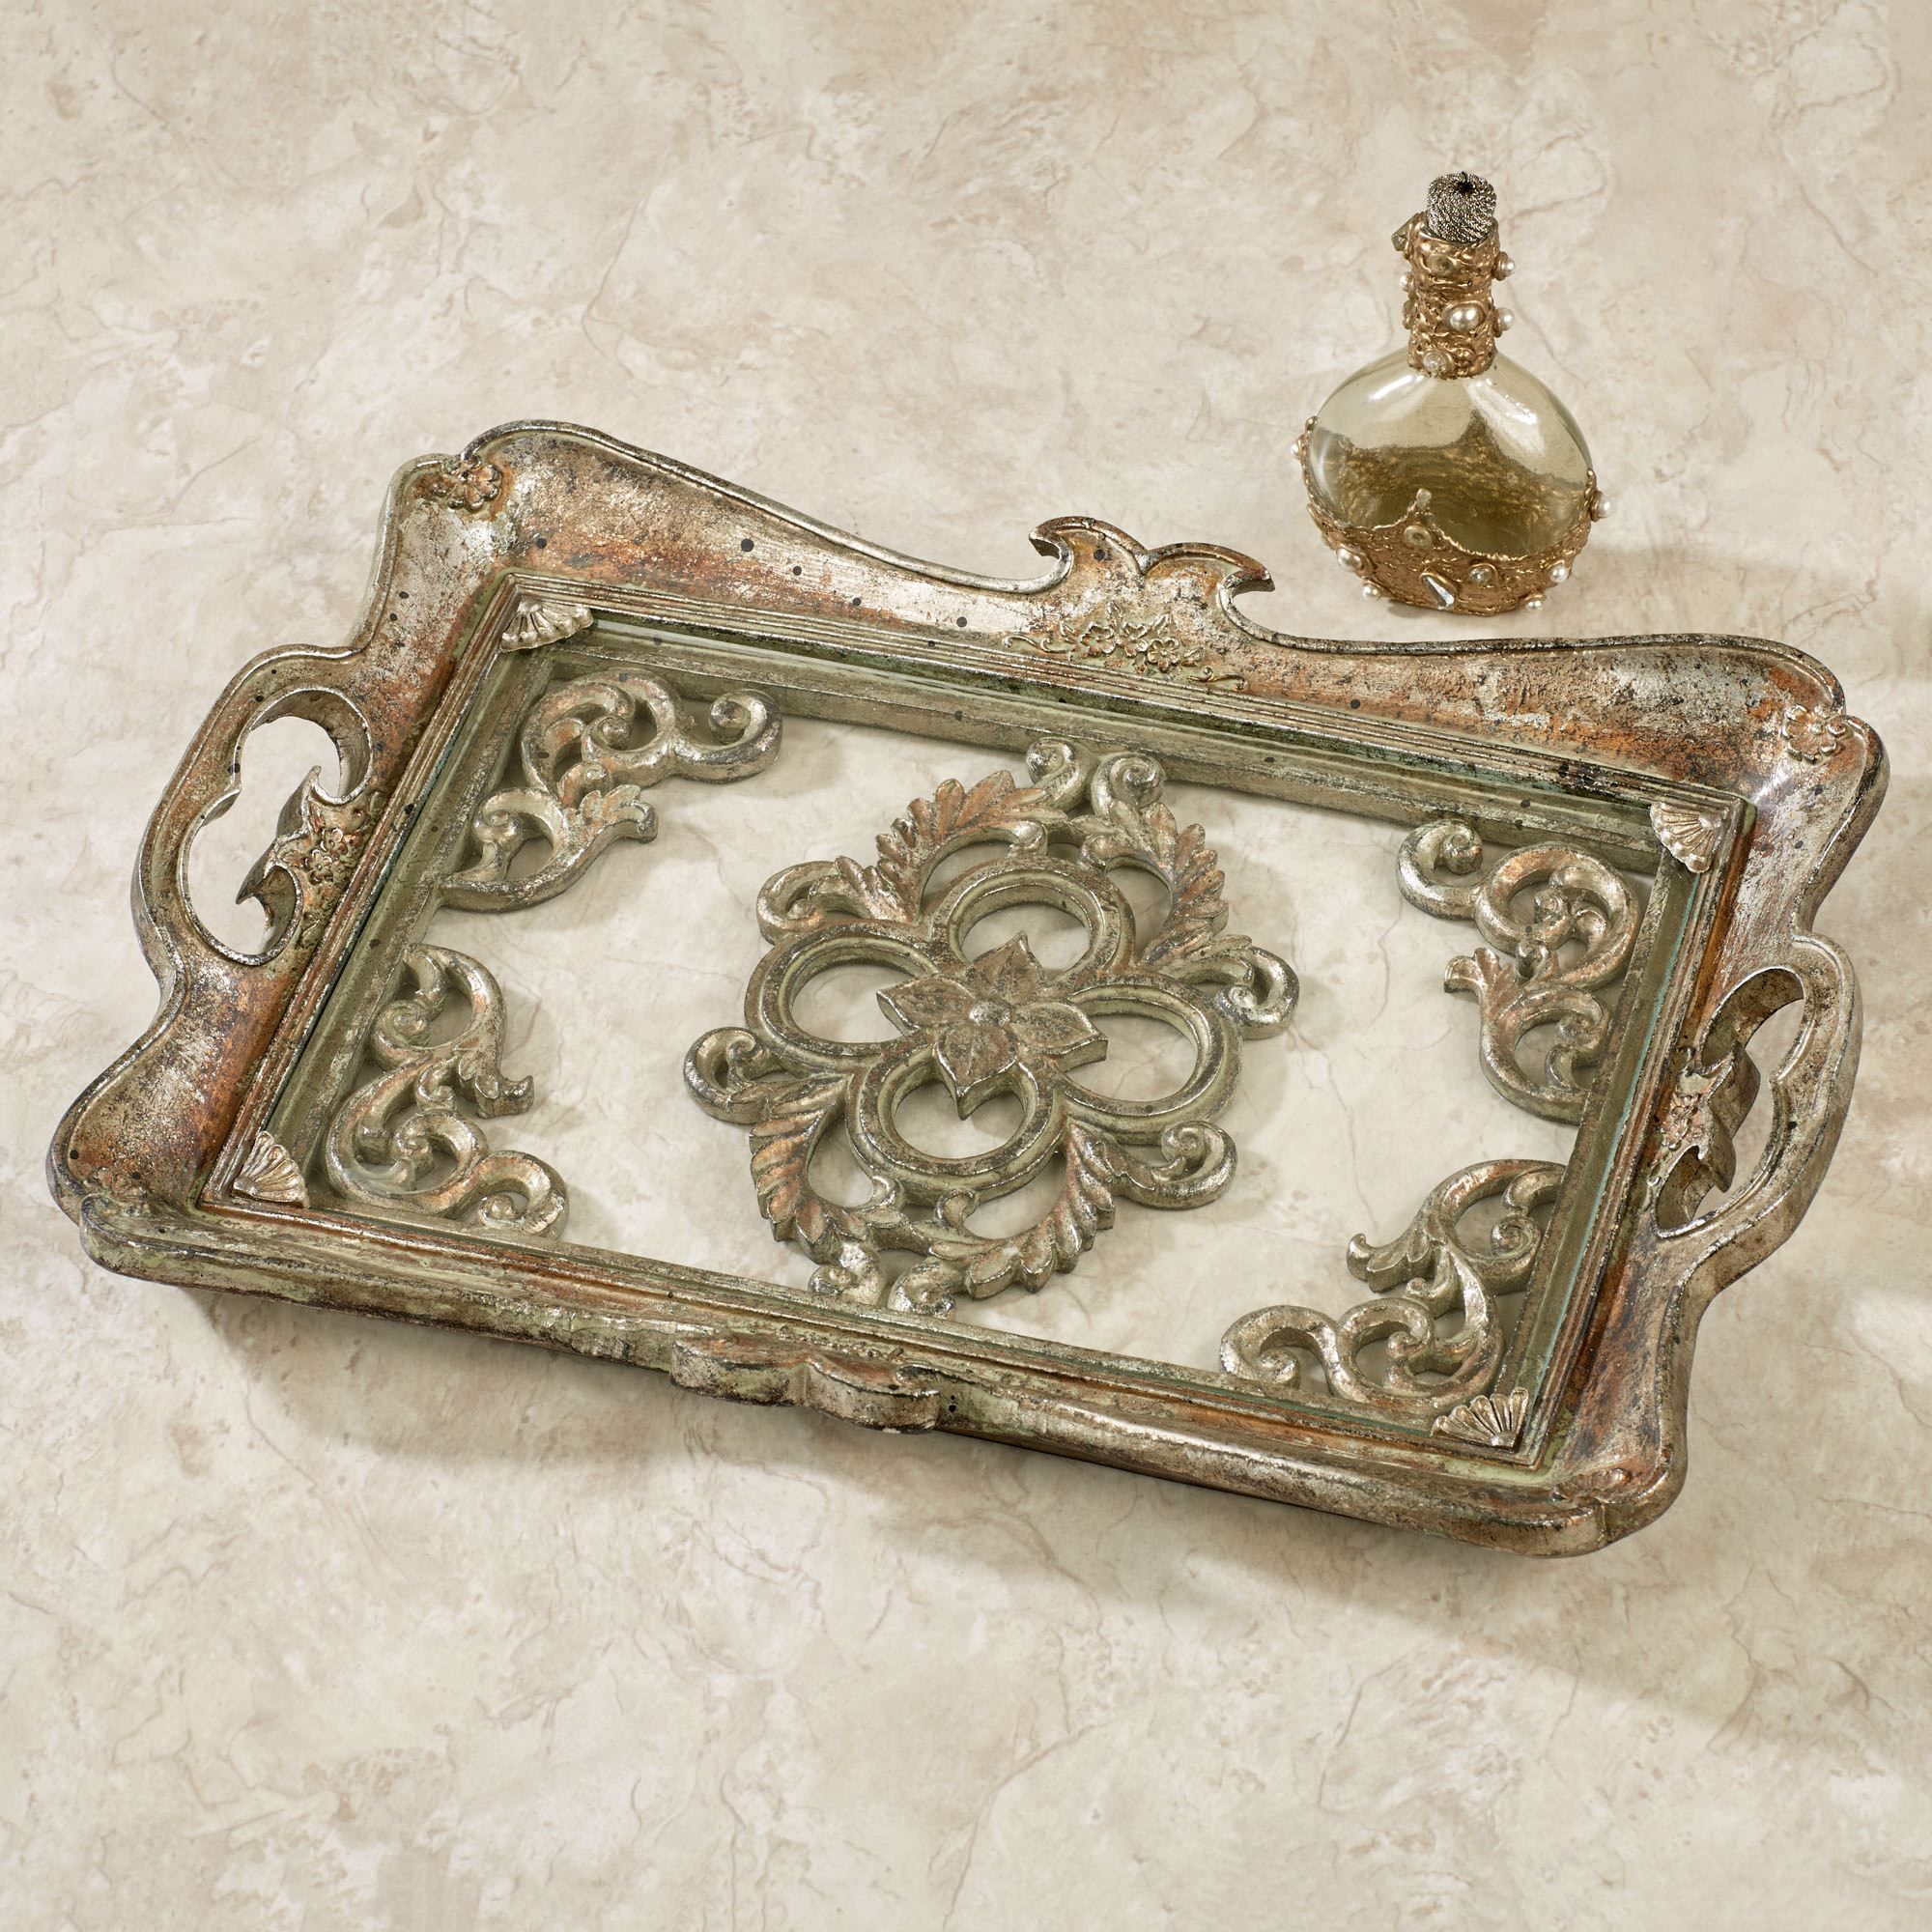 Bethney Glass Vanity Tray Intended For Aged Silver Vanity Mirrors (View 15 of 15)